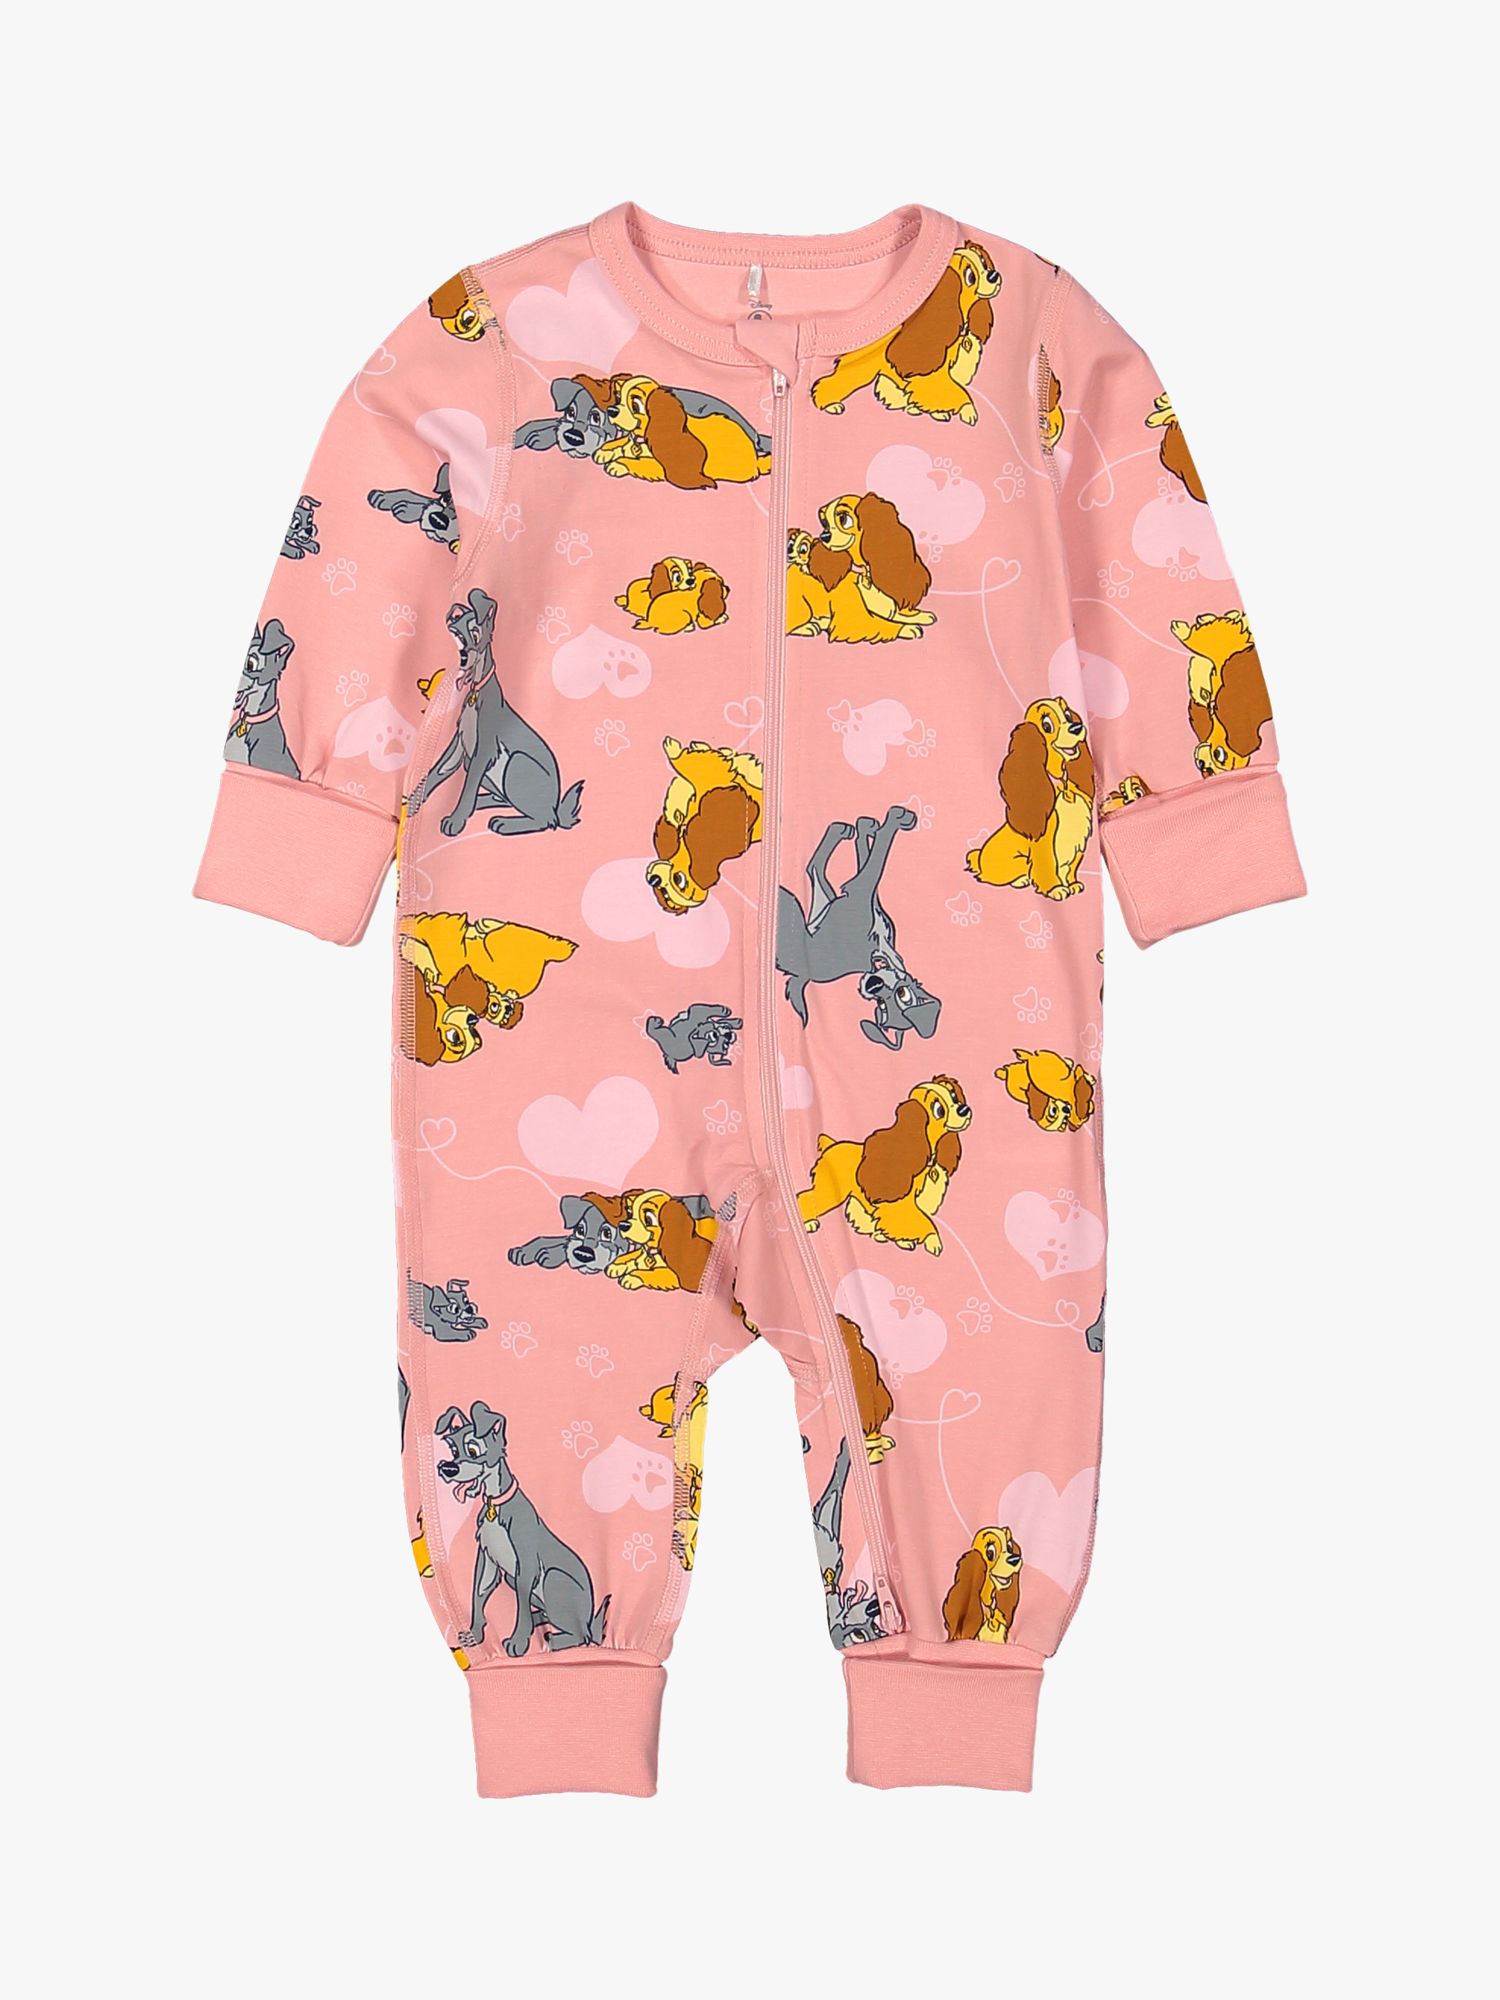 Polarn O. Pyret Baby GOTS Organic Cotton Lady and the Tramp Print Onesie, Pink